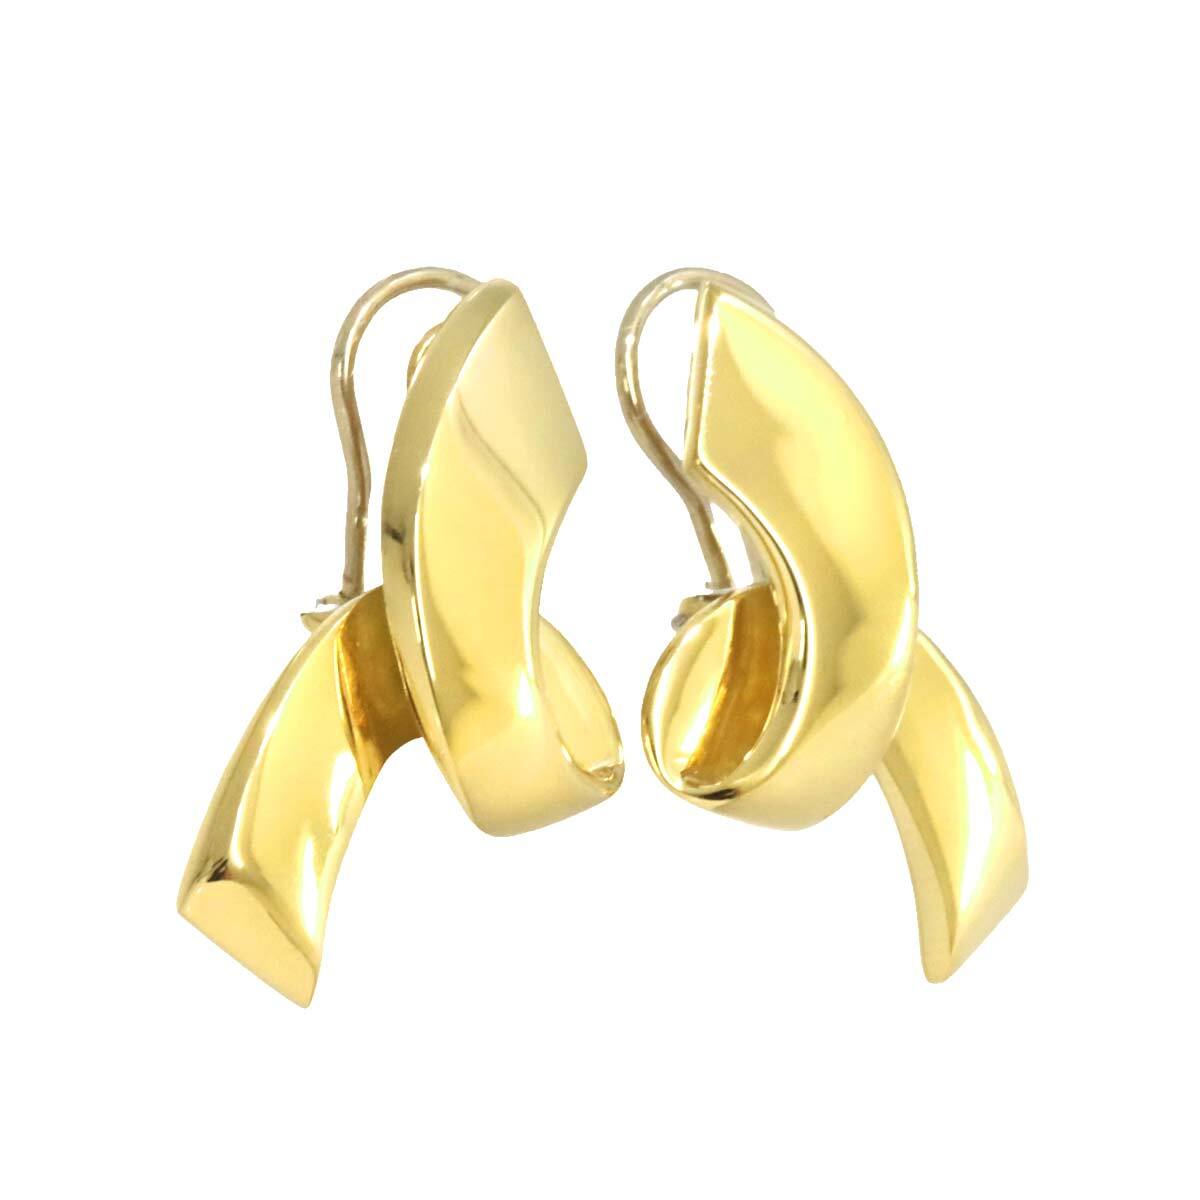  Tiffany TIFFANY&Co.paroma* Picasso earrings K18 YG yellow gold 750 Earrings Clip-on 90201082